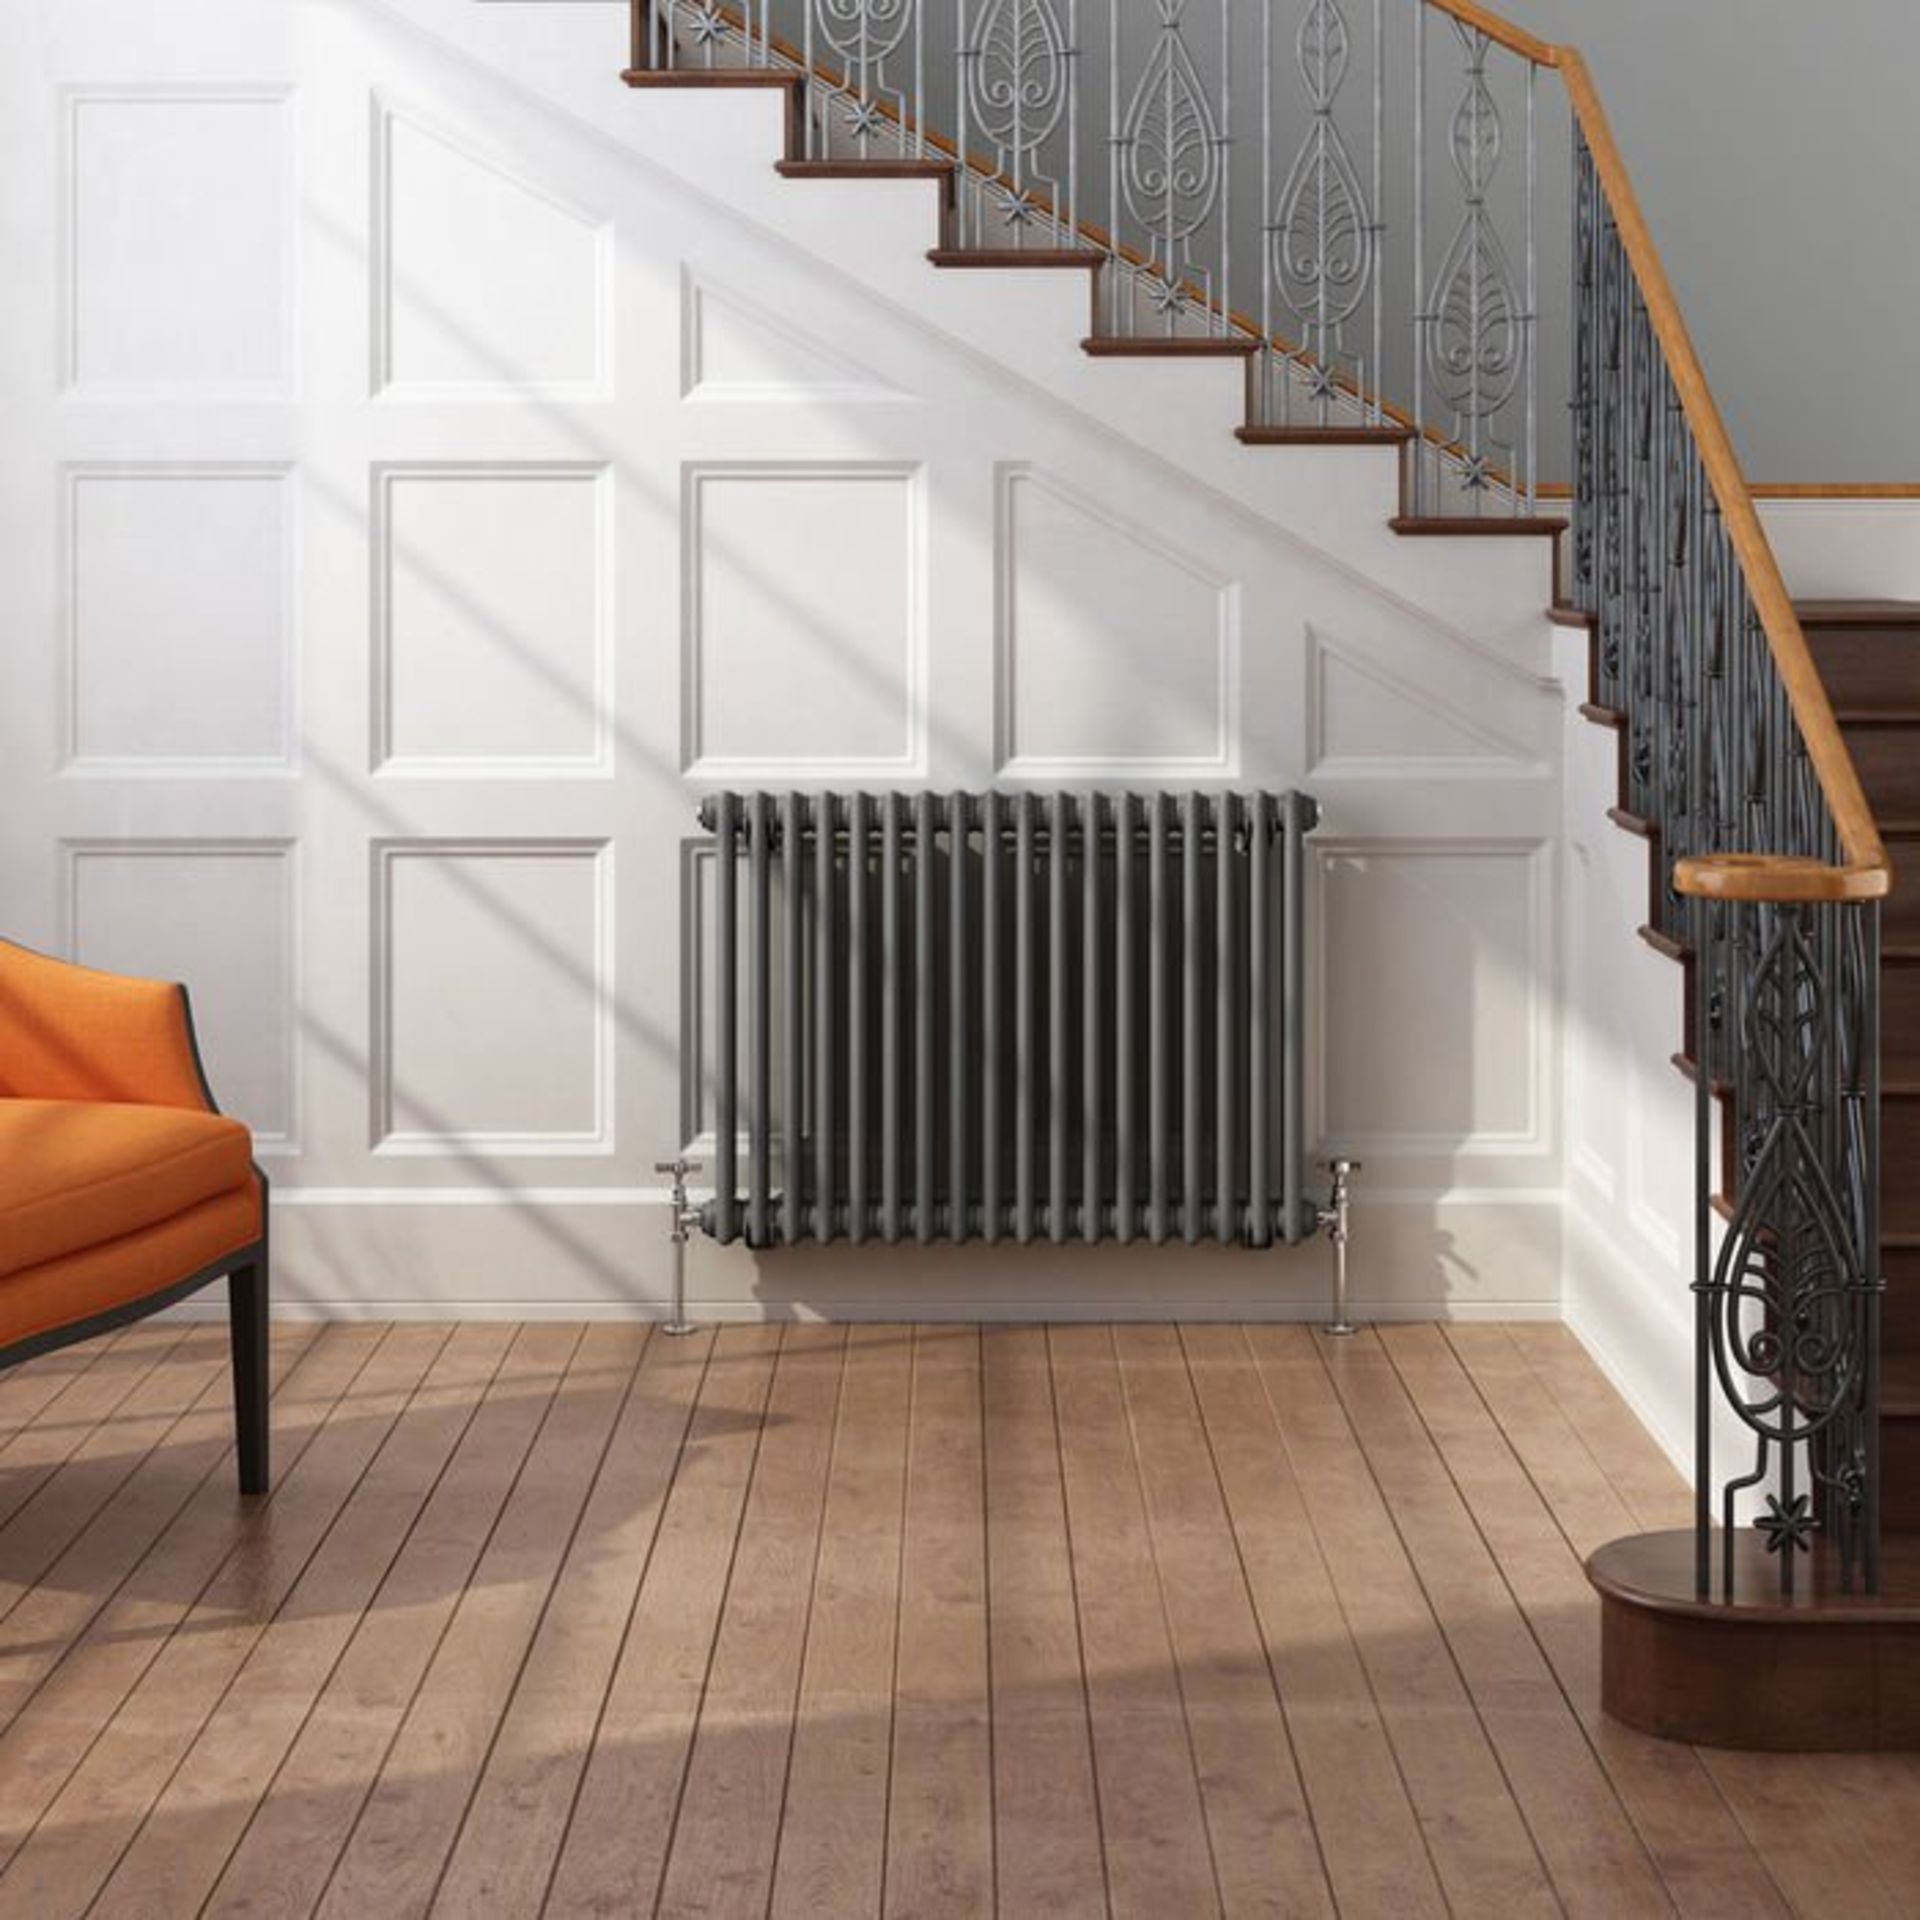 (S203) 600x828mm Anthracite Double Panel Horizontal Colosseum Traditional Radiator. RRP £447.99. - Image 3 of 4